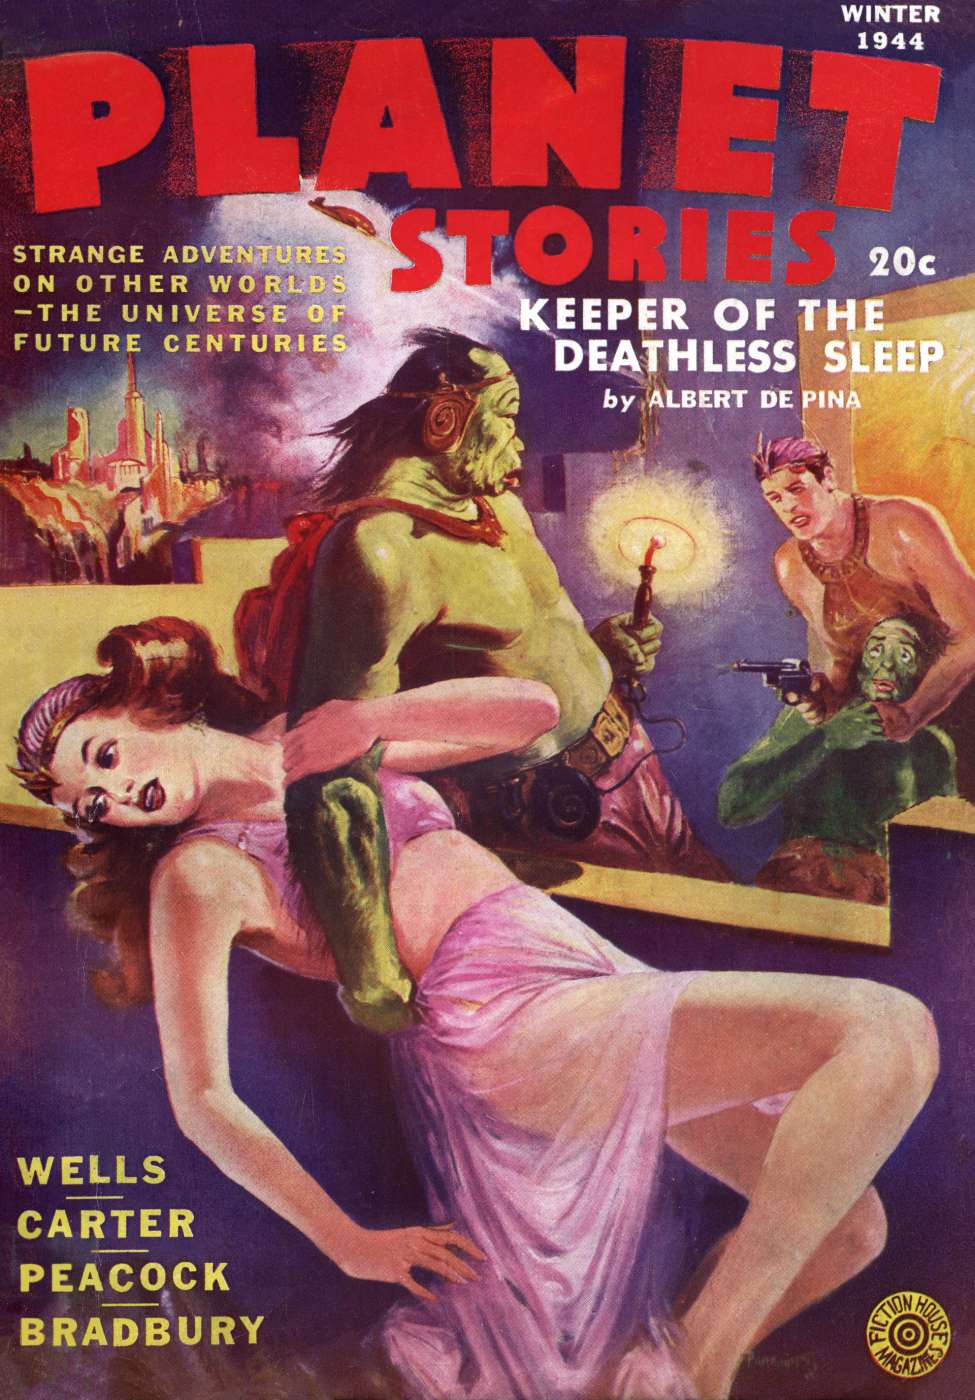 Comic Book Cover For Planet Stories v2 9 - Keeper of the Deathless Sleep - Albert dePina